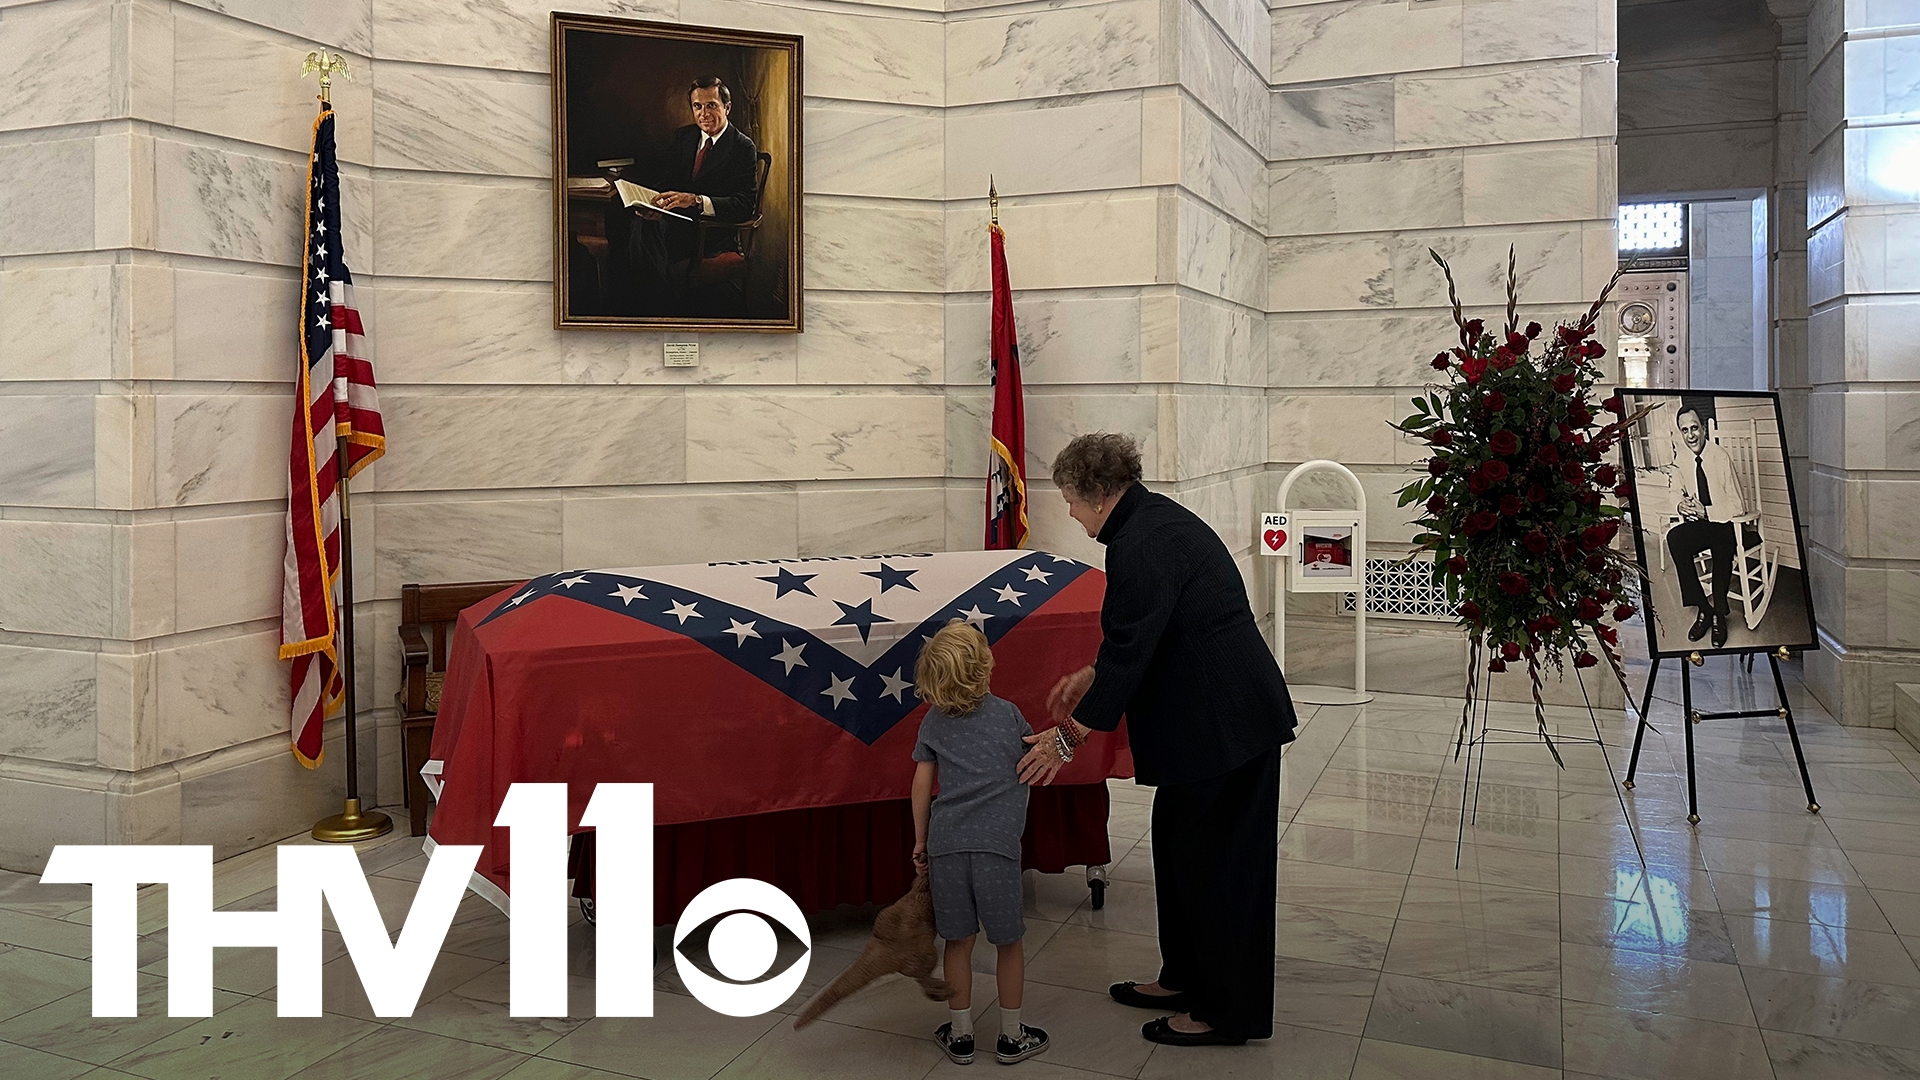 Funeral services for David Pryor were held for family, friends and colleagues, including former Arkansas governor and President Bill Clinton.